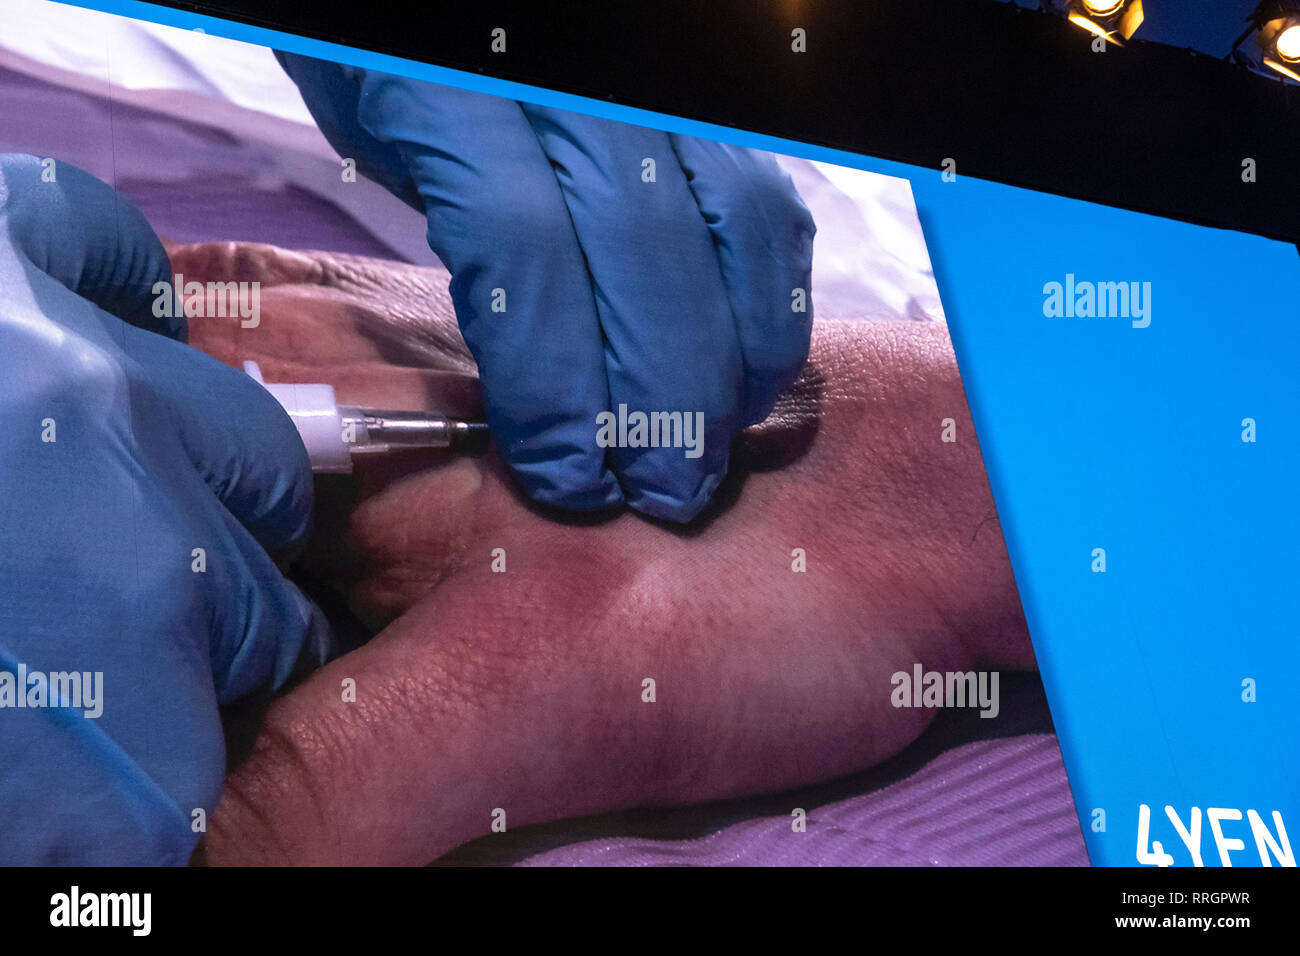 The hand of the volunteer Edgar Pons is seen during the Live Human Chip Implant Show.  Edgar Pons has been implanted with an RFID chip in his hand. Minutes later he has ordered a bank transfer using his hand as an authorization signature. In parallel to the MWC, Barcelona celebrates 4YFN Connecting Startups a fair of small business initiatives connected by technology. Stock Photo